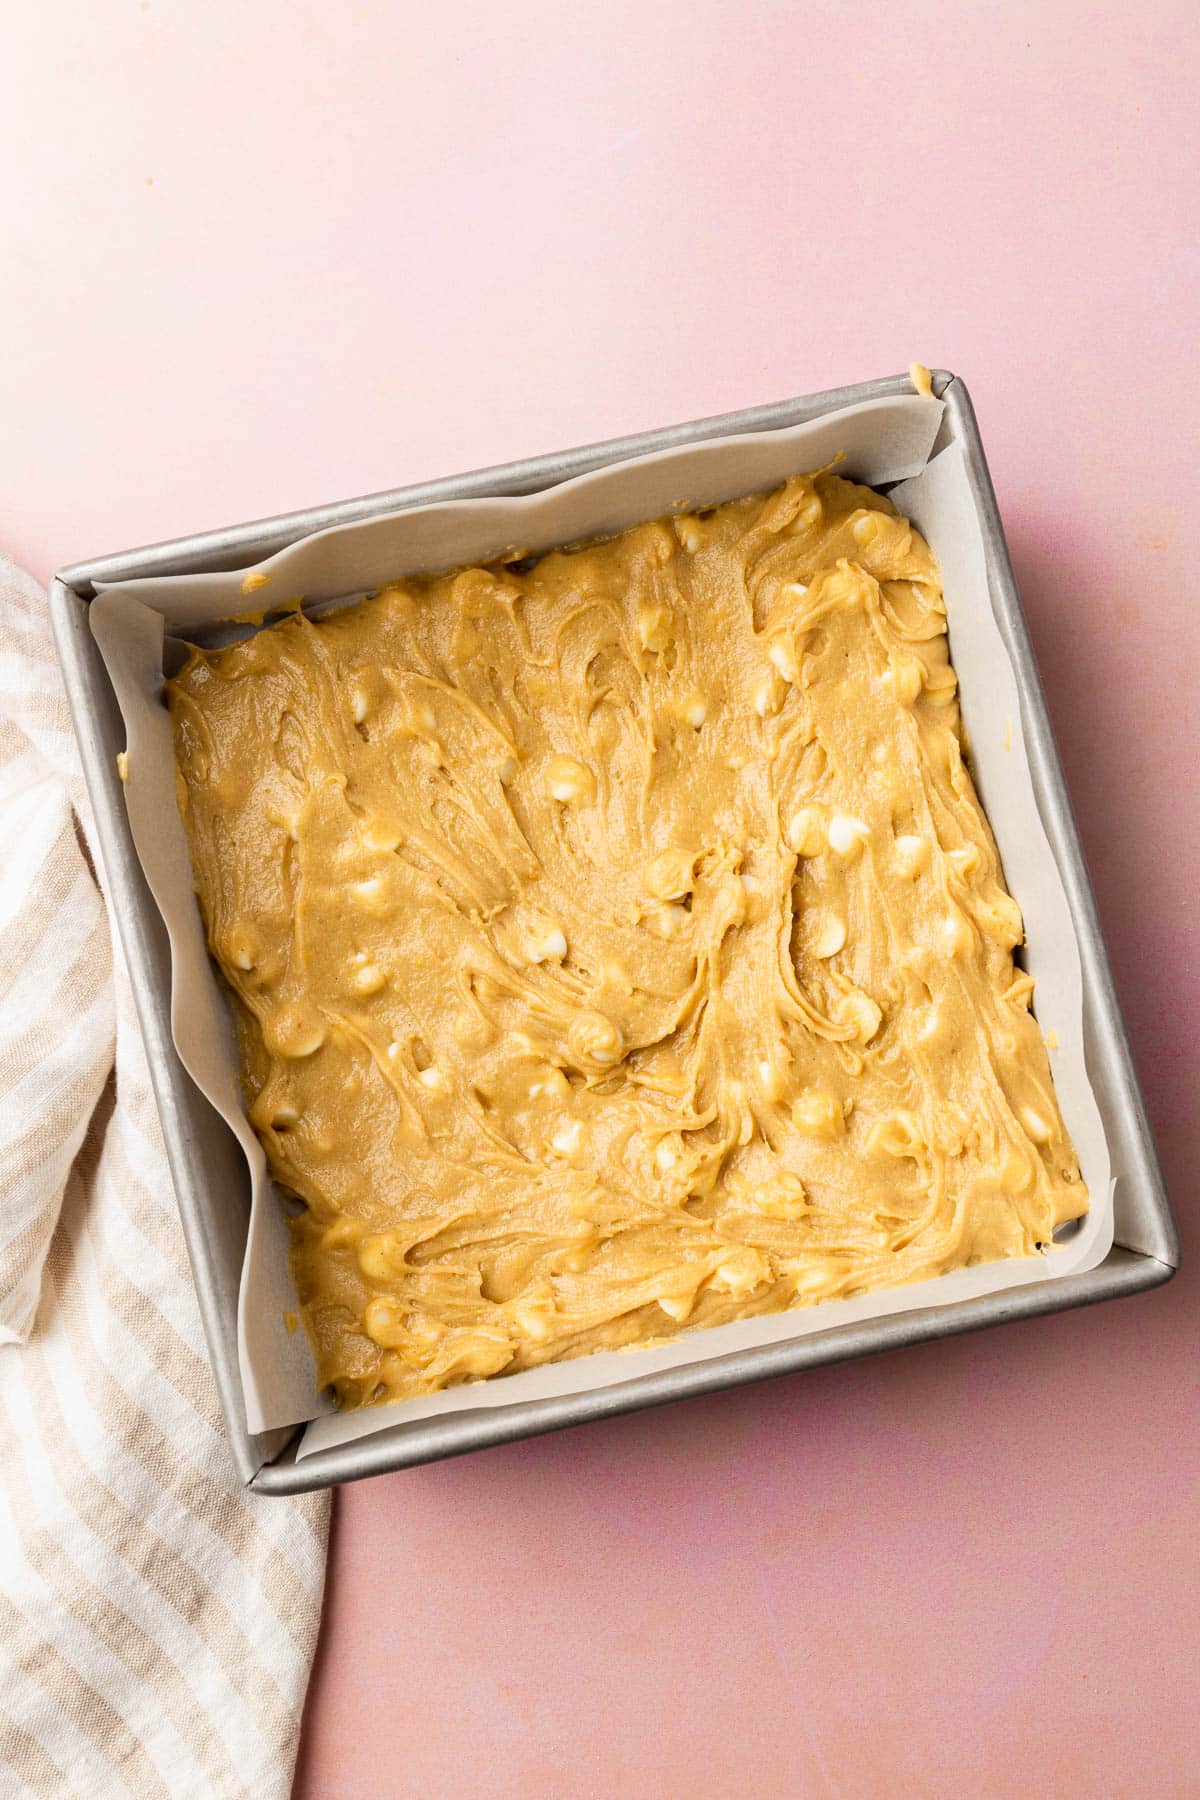 A square baking dish with gluten-free blondie batter in it before baking in the oven.